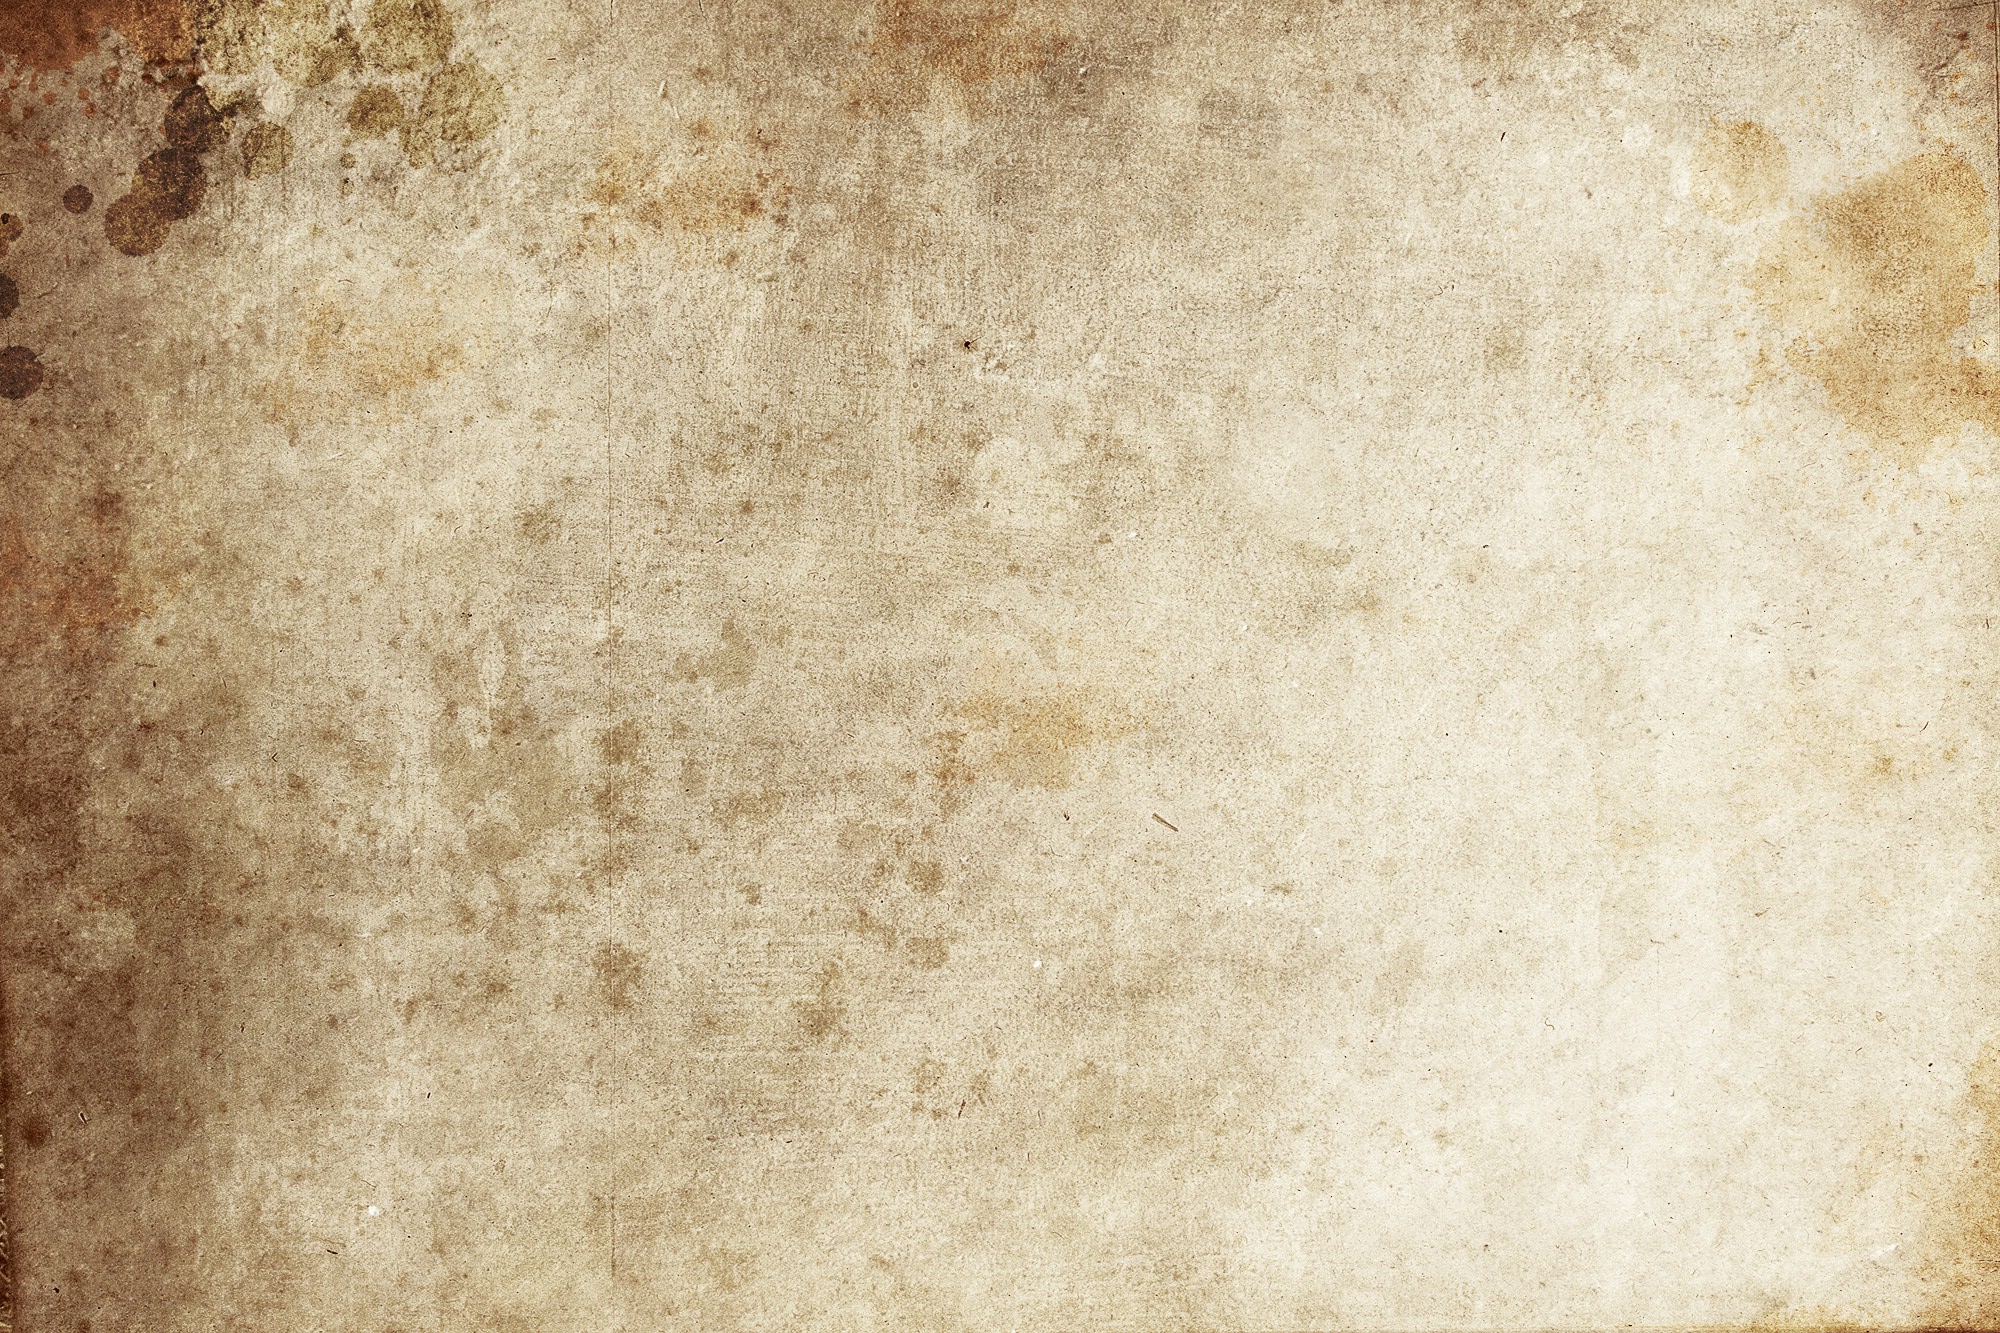 Paper Grunge Background One Hundred and Five | Photo Texture ...